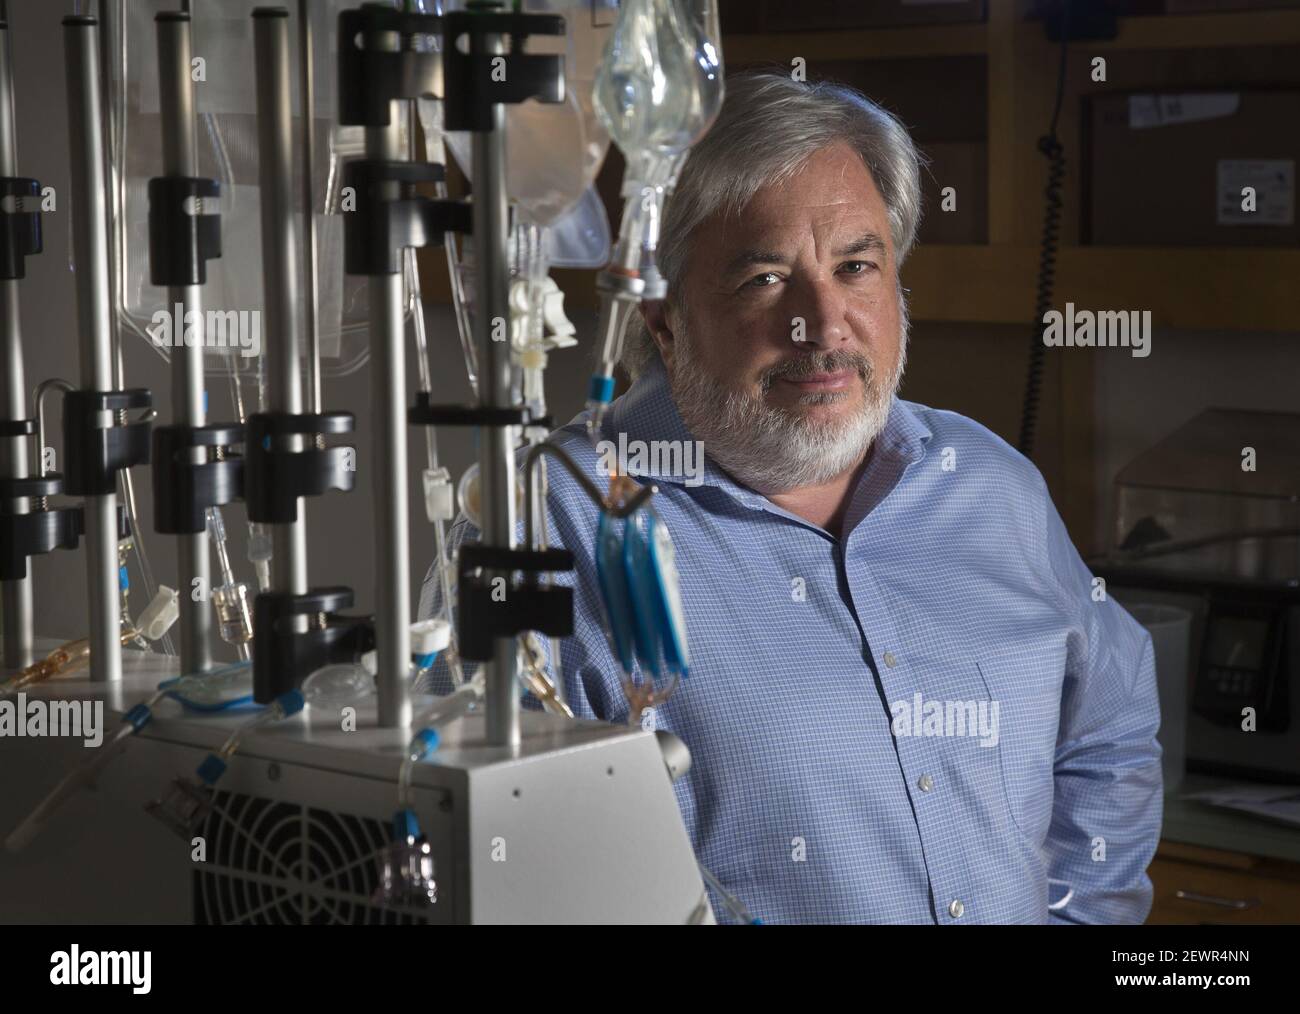 Dr. David DiGiusto directs Stanford's new Laboratory for Cell and Gene Medicine. The university has built a cell manufacturing facility that will generate banks of induced pluripotent stem cells and other specialized tissues such as heart muscle cells, that are derived from stem cells. These cells can be used to test the effects of drugs in a 'clinical trial in a dish' or potentially even used to repair tissues injured by disease or trauma. (Photo by Patrick Tehan/Bay Area News Group/TNS) *** Please Use Credit from Credit Field *** Stock Photo